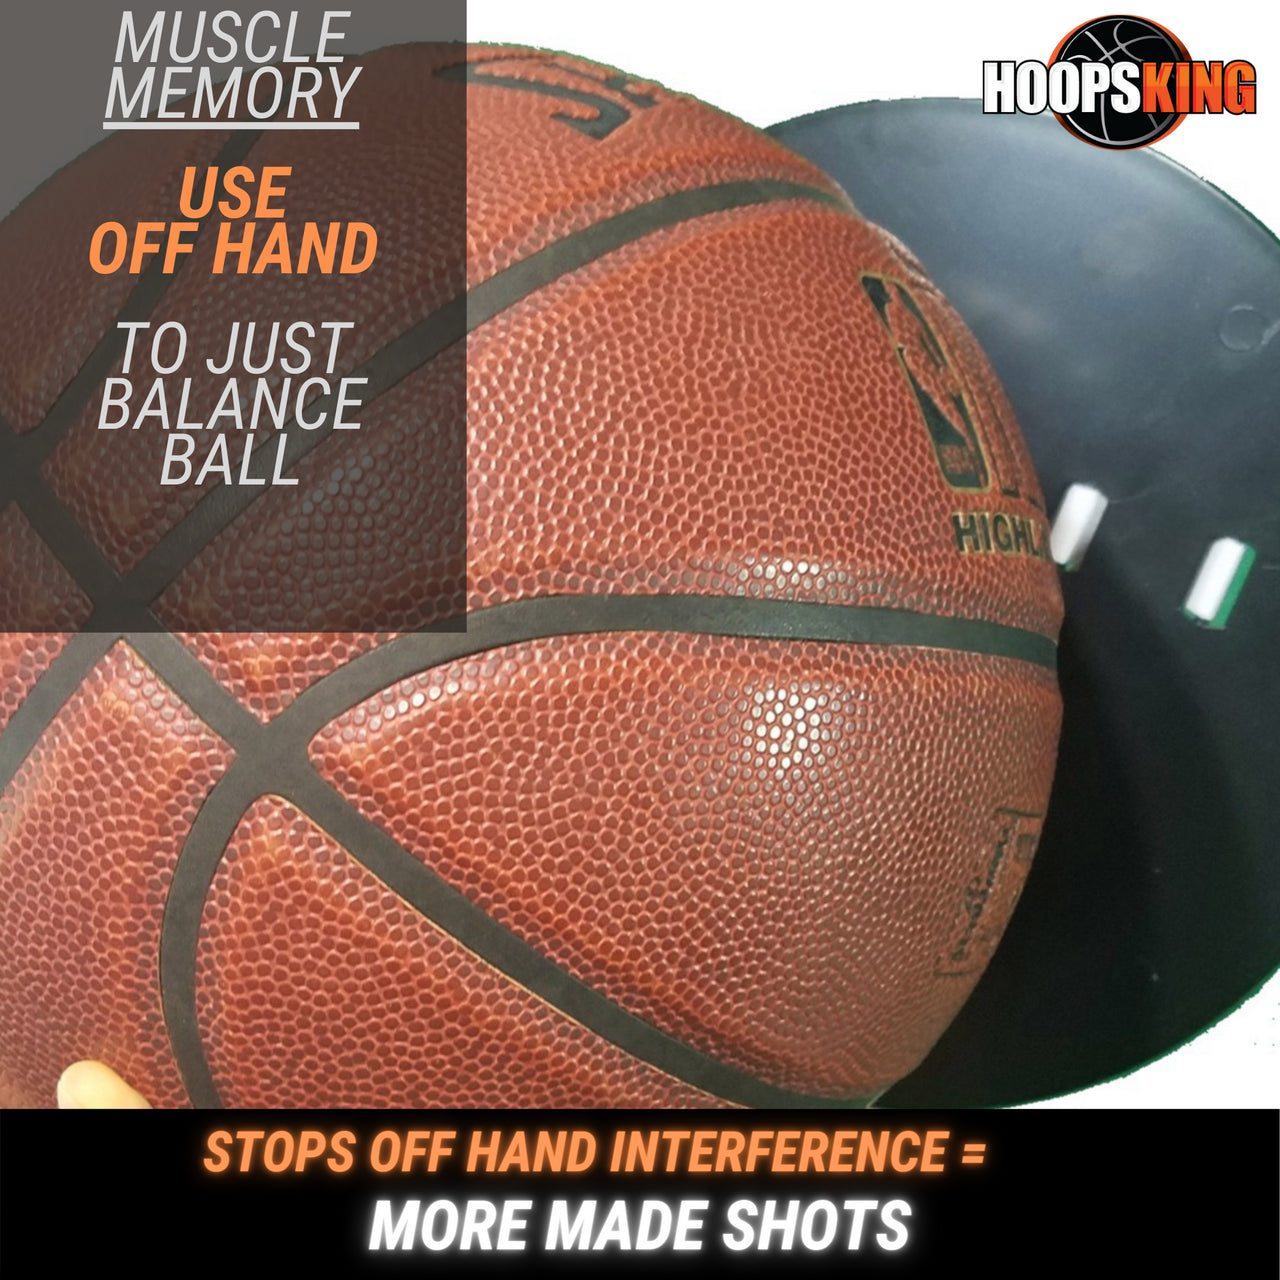 smooth shooter off hand basketball training aid